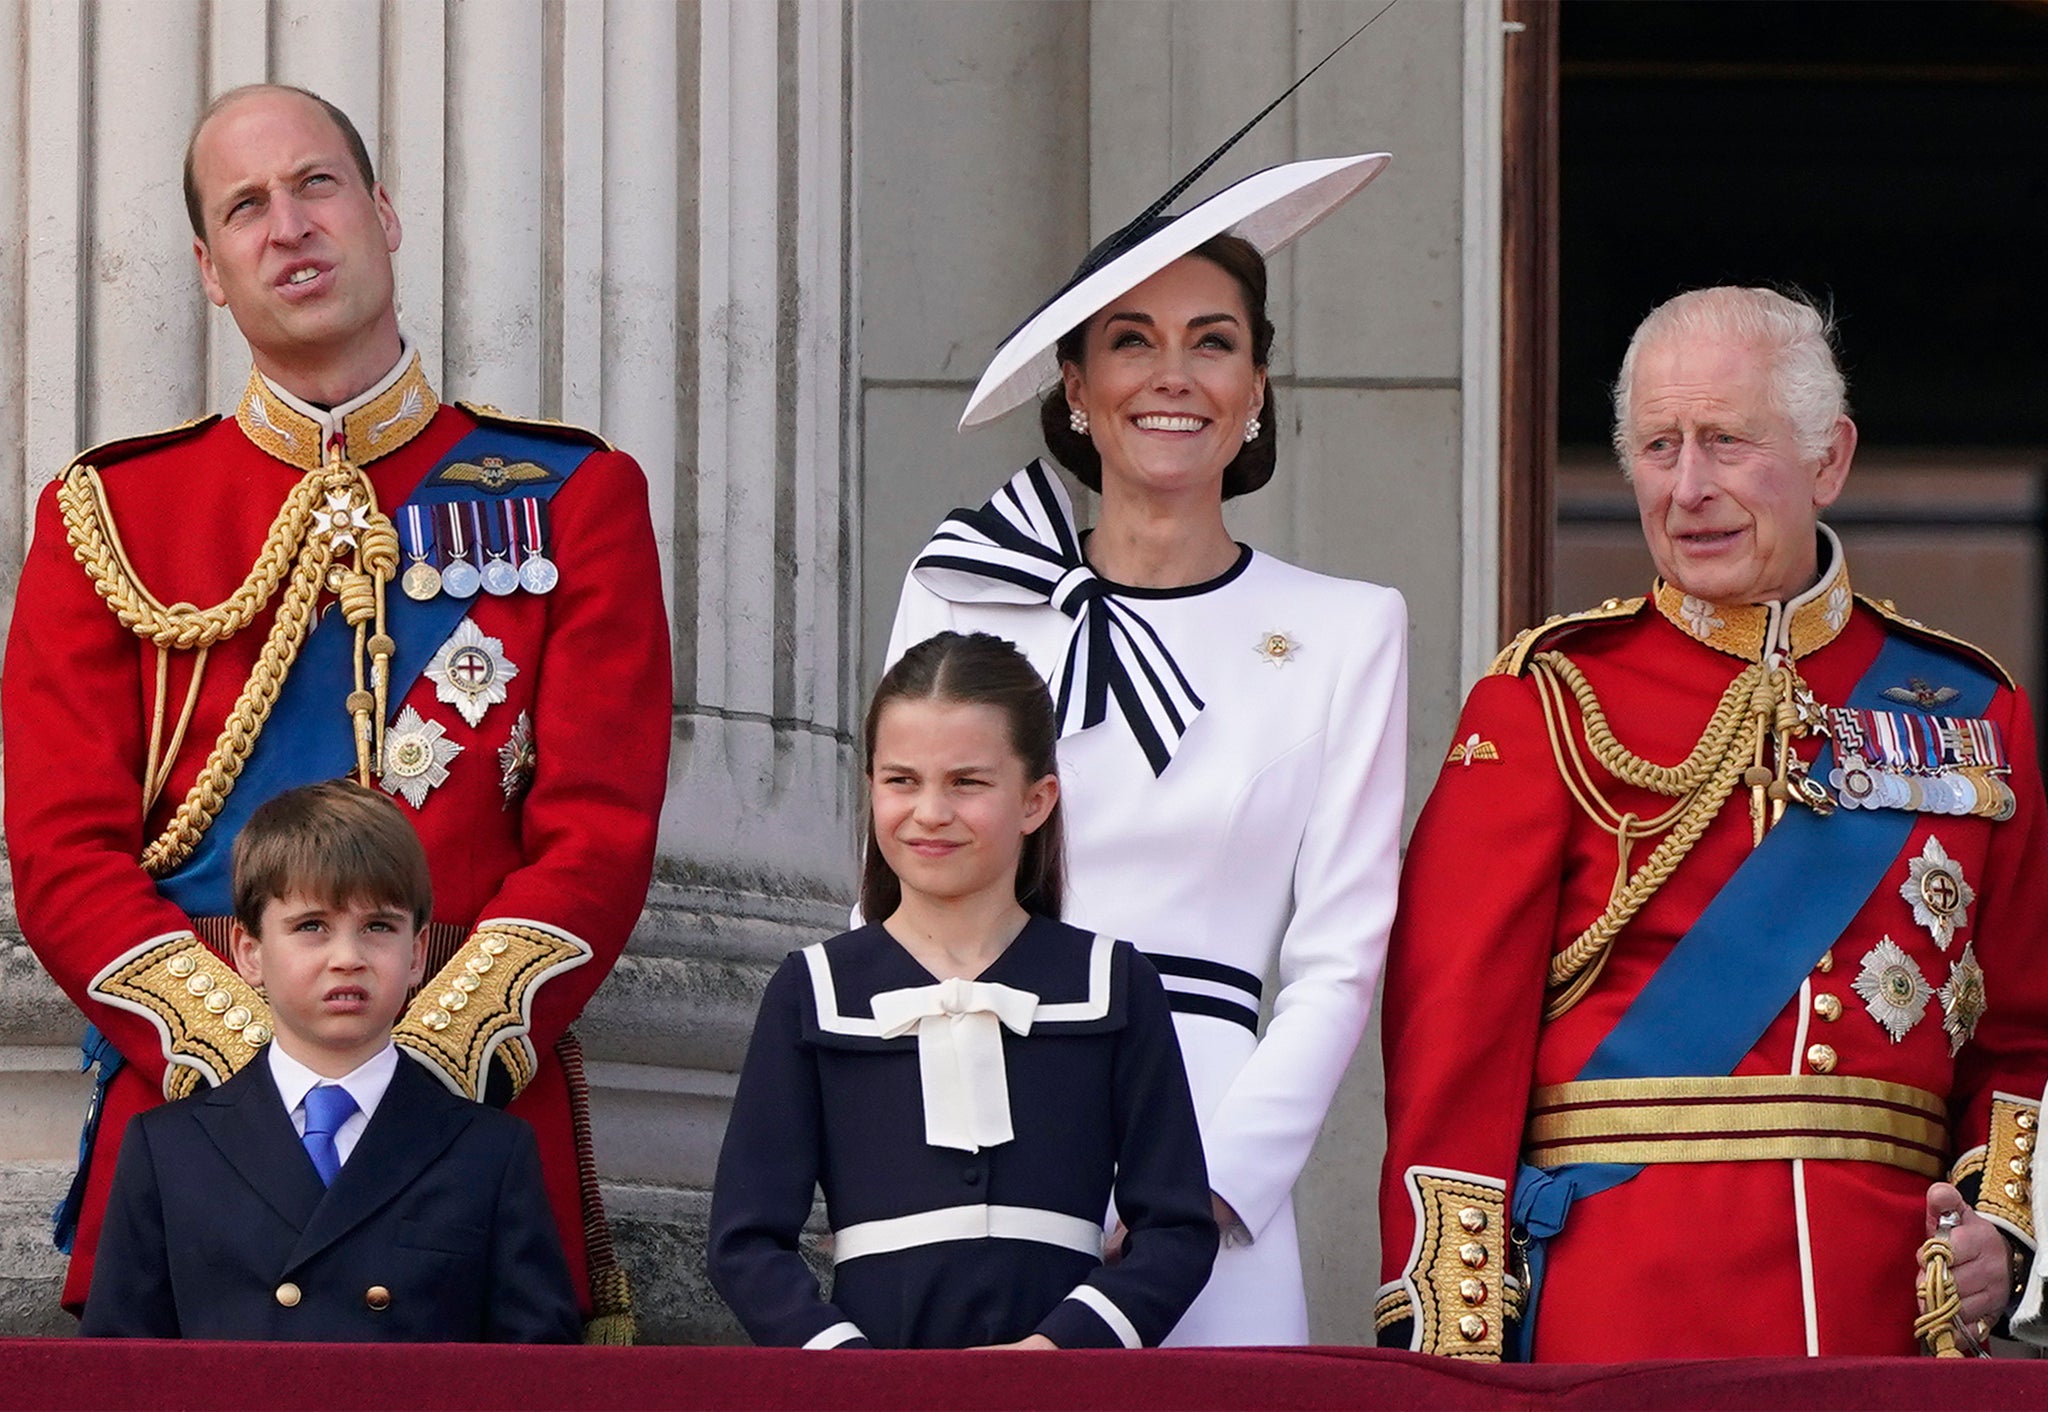 The Princess of Wales dazzled as she stood next to the King on the Buckingham Palace balcony